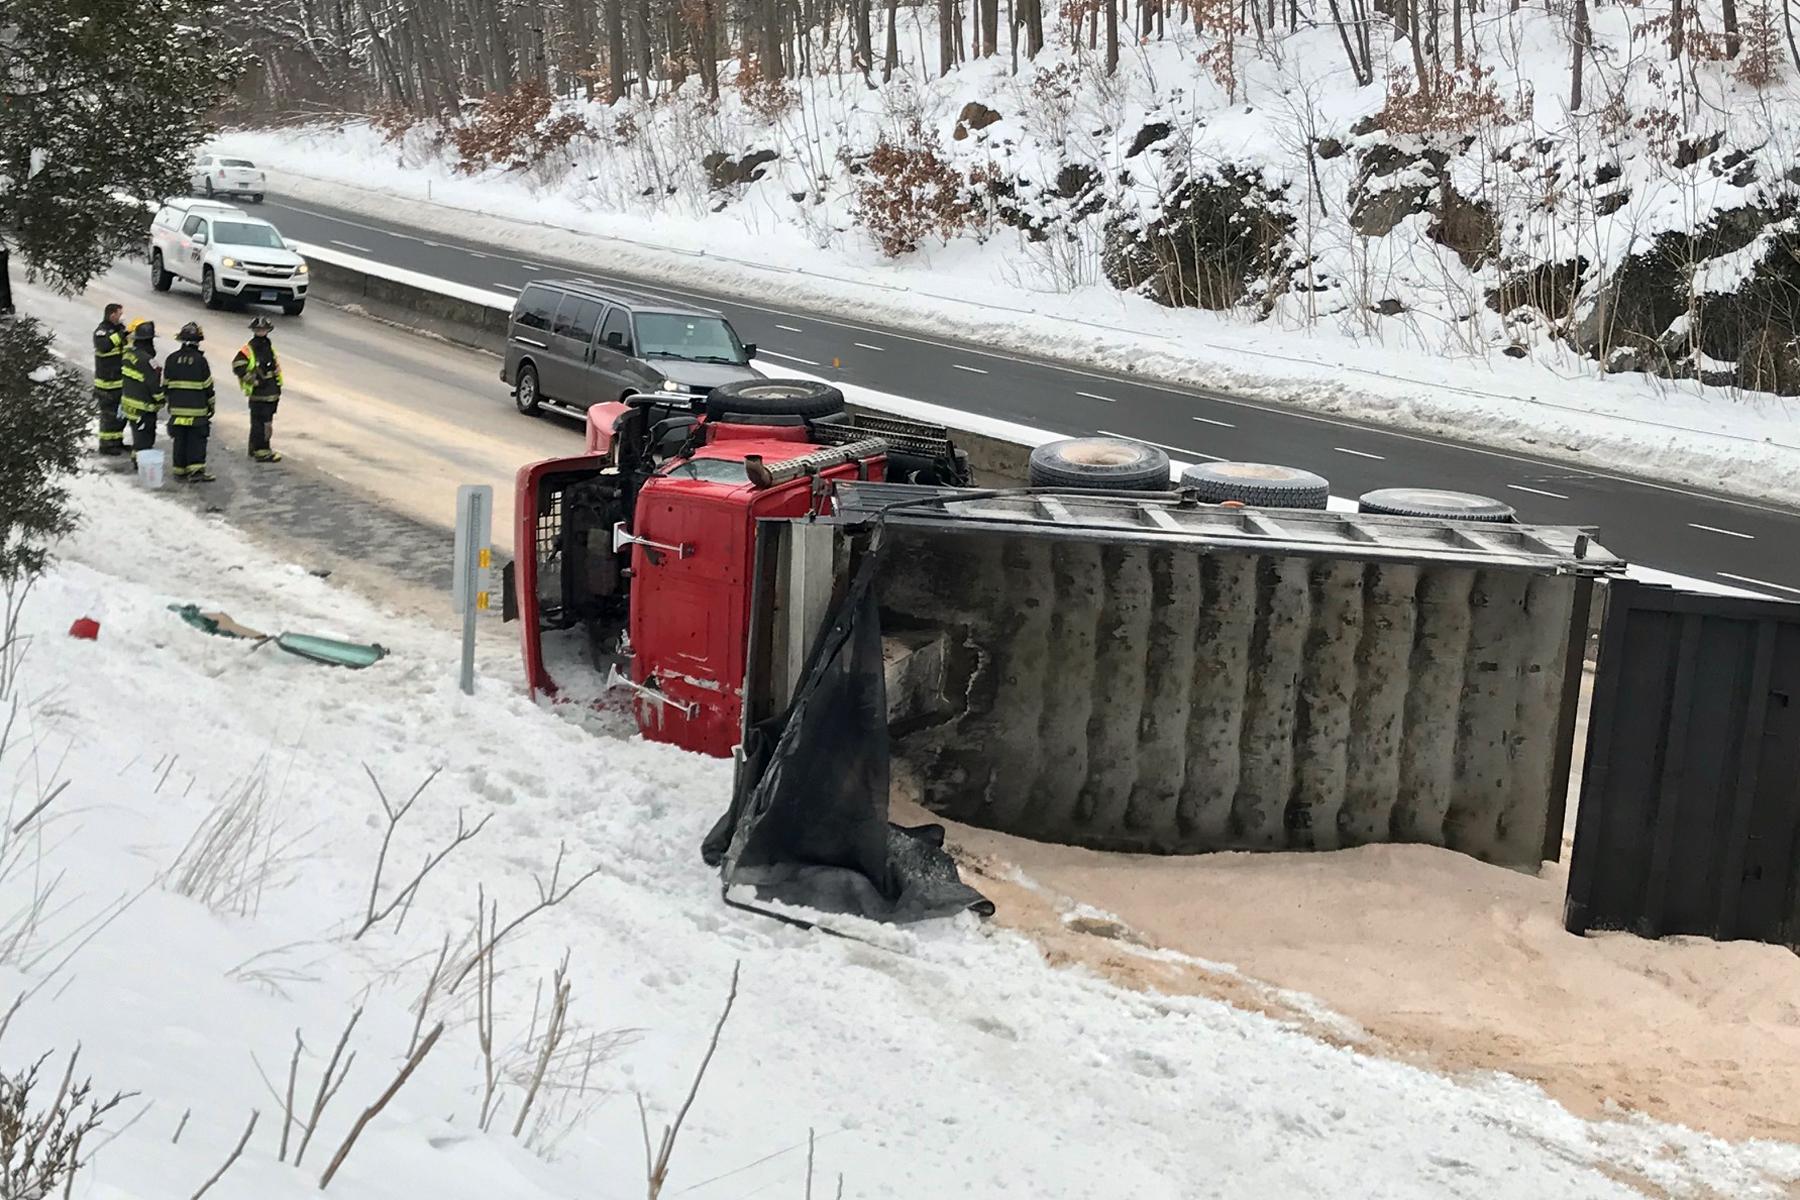 FD units: Truck rollover dumps 22 tons of salt on Route 8 in Ansonia